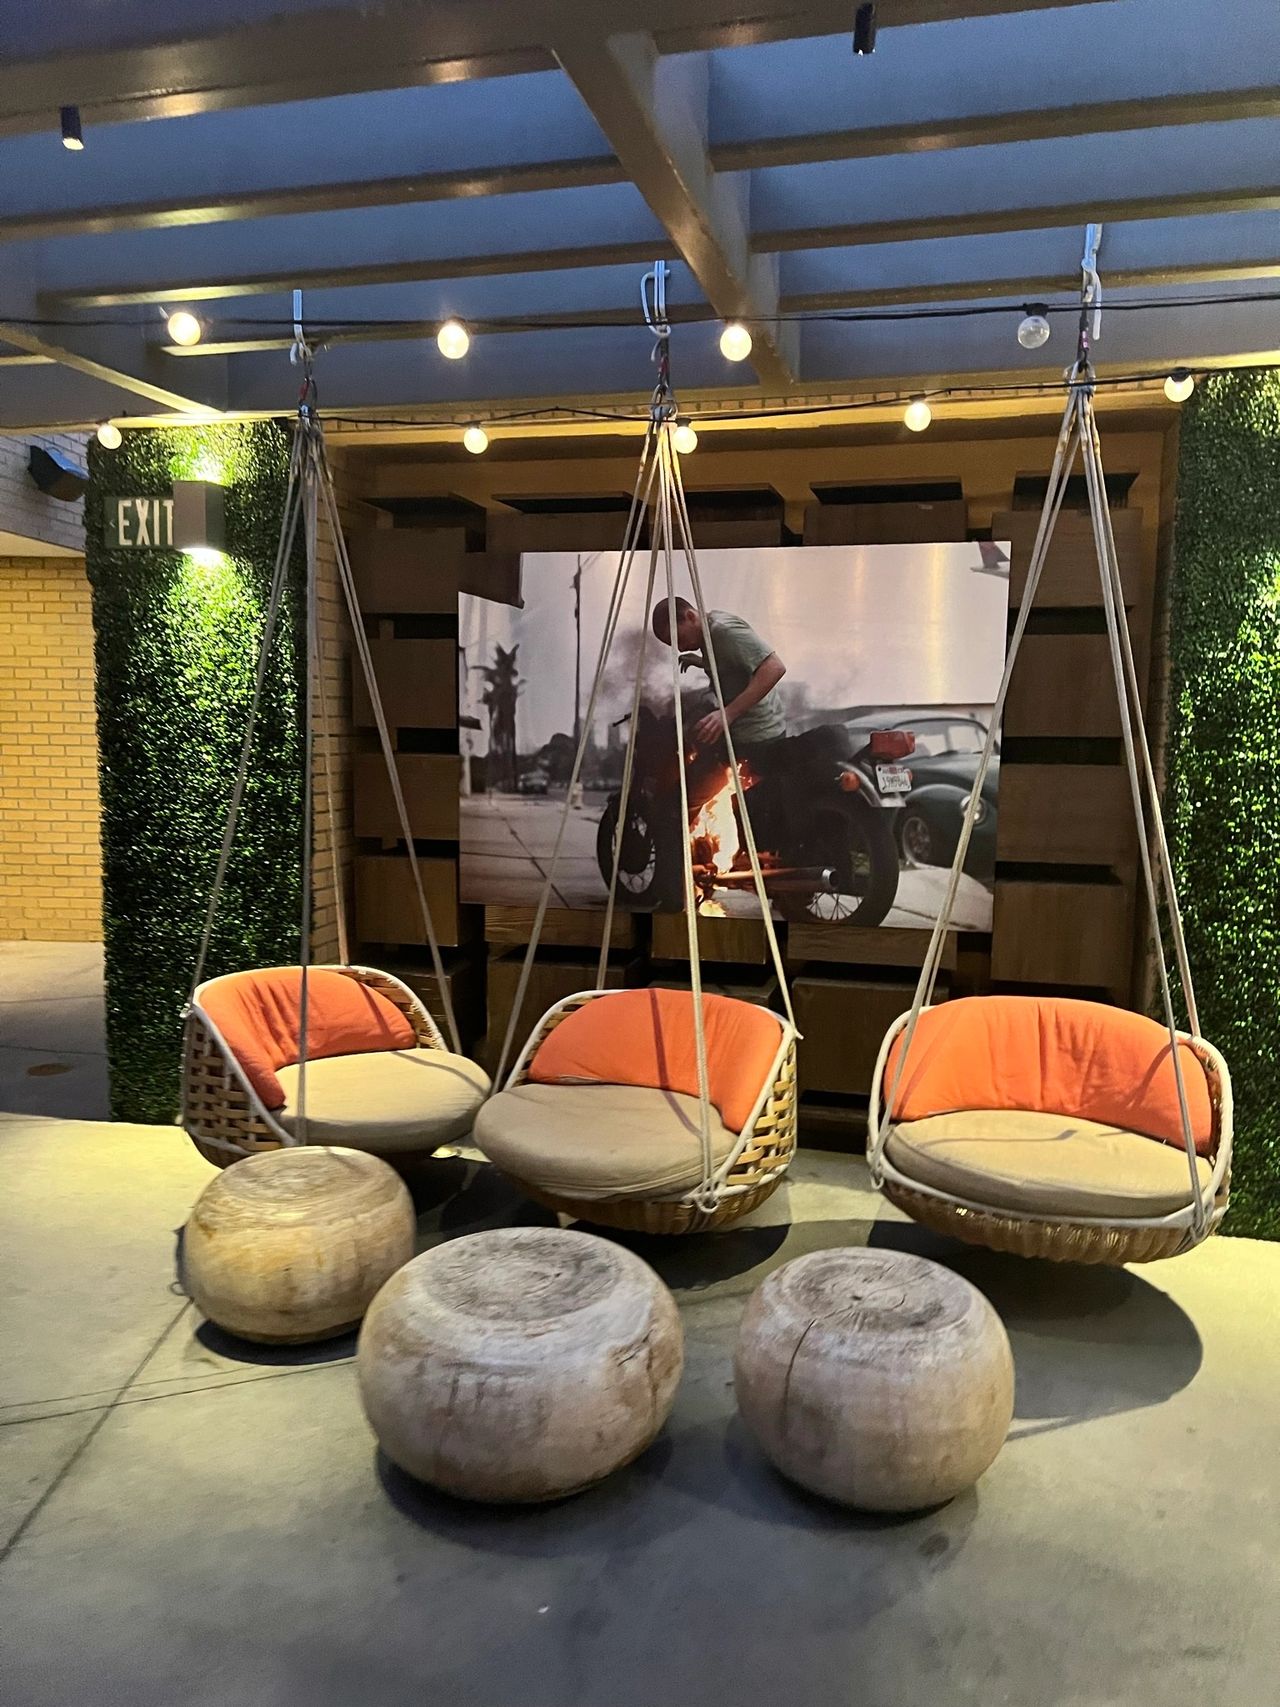 The swing chairs in the corner of the rooftop